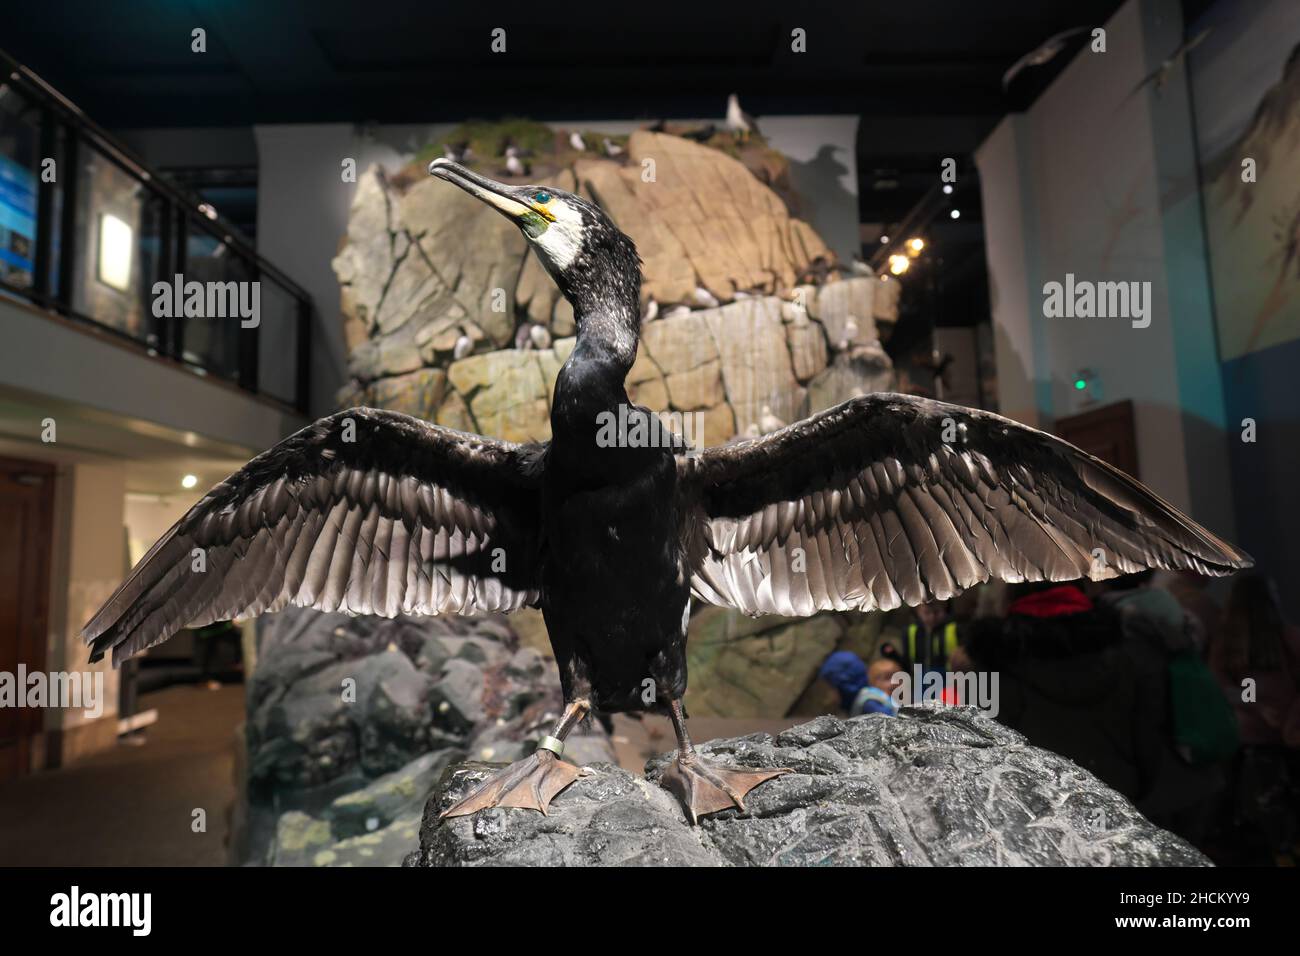 A comorant bird ( Phalacrocorax carbo ) exhibit in the natural history section of the National Museum Wales in Cardiff Wales UK Stock Photo